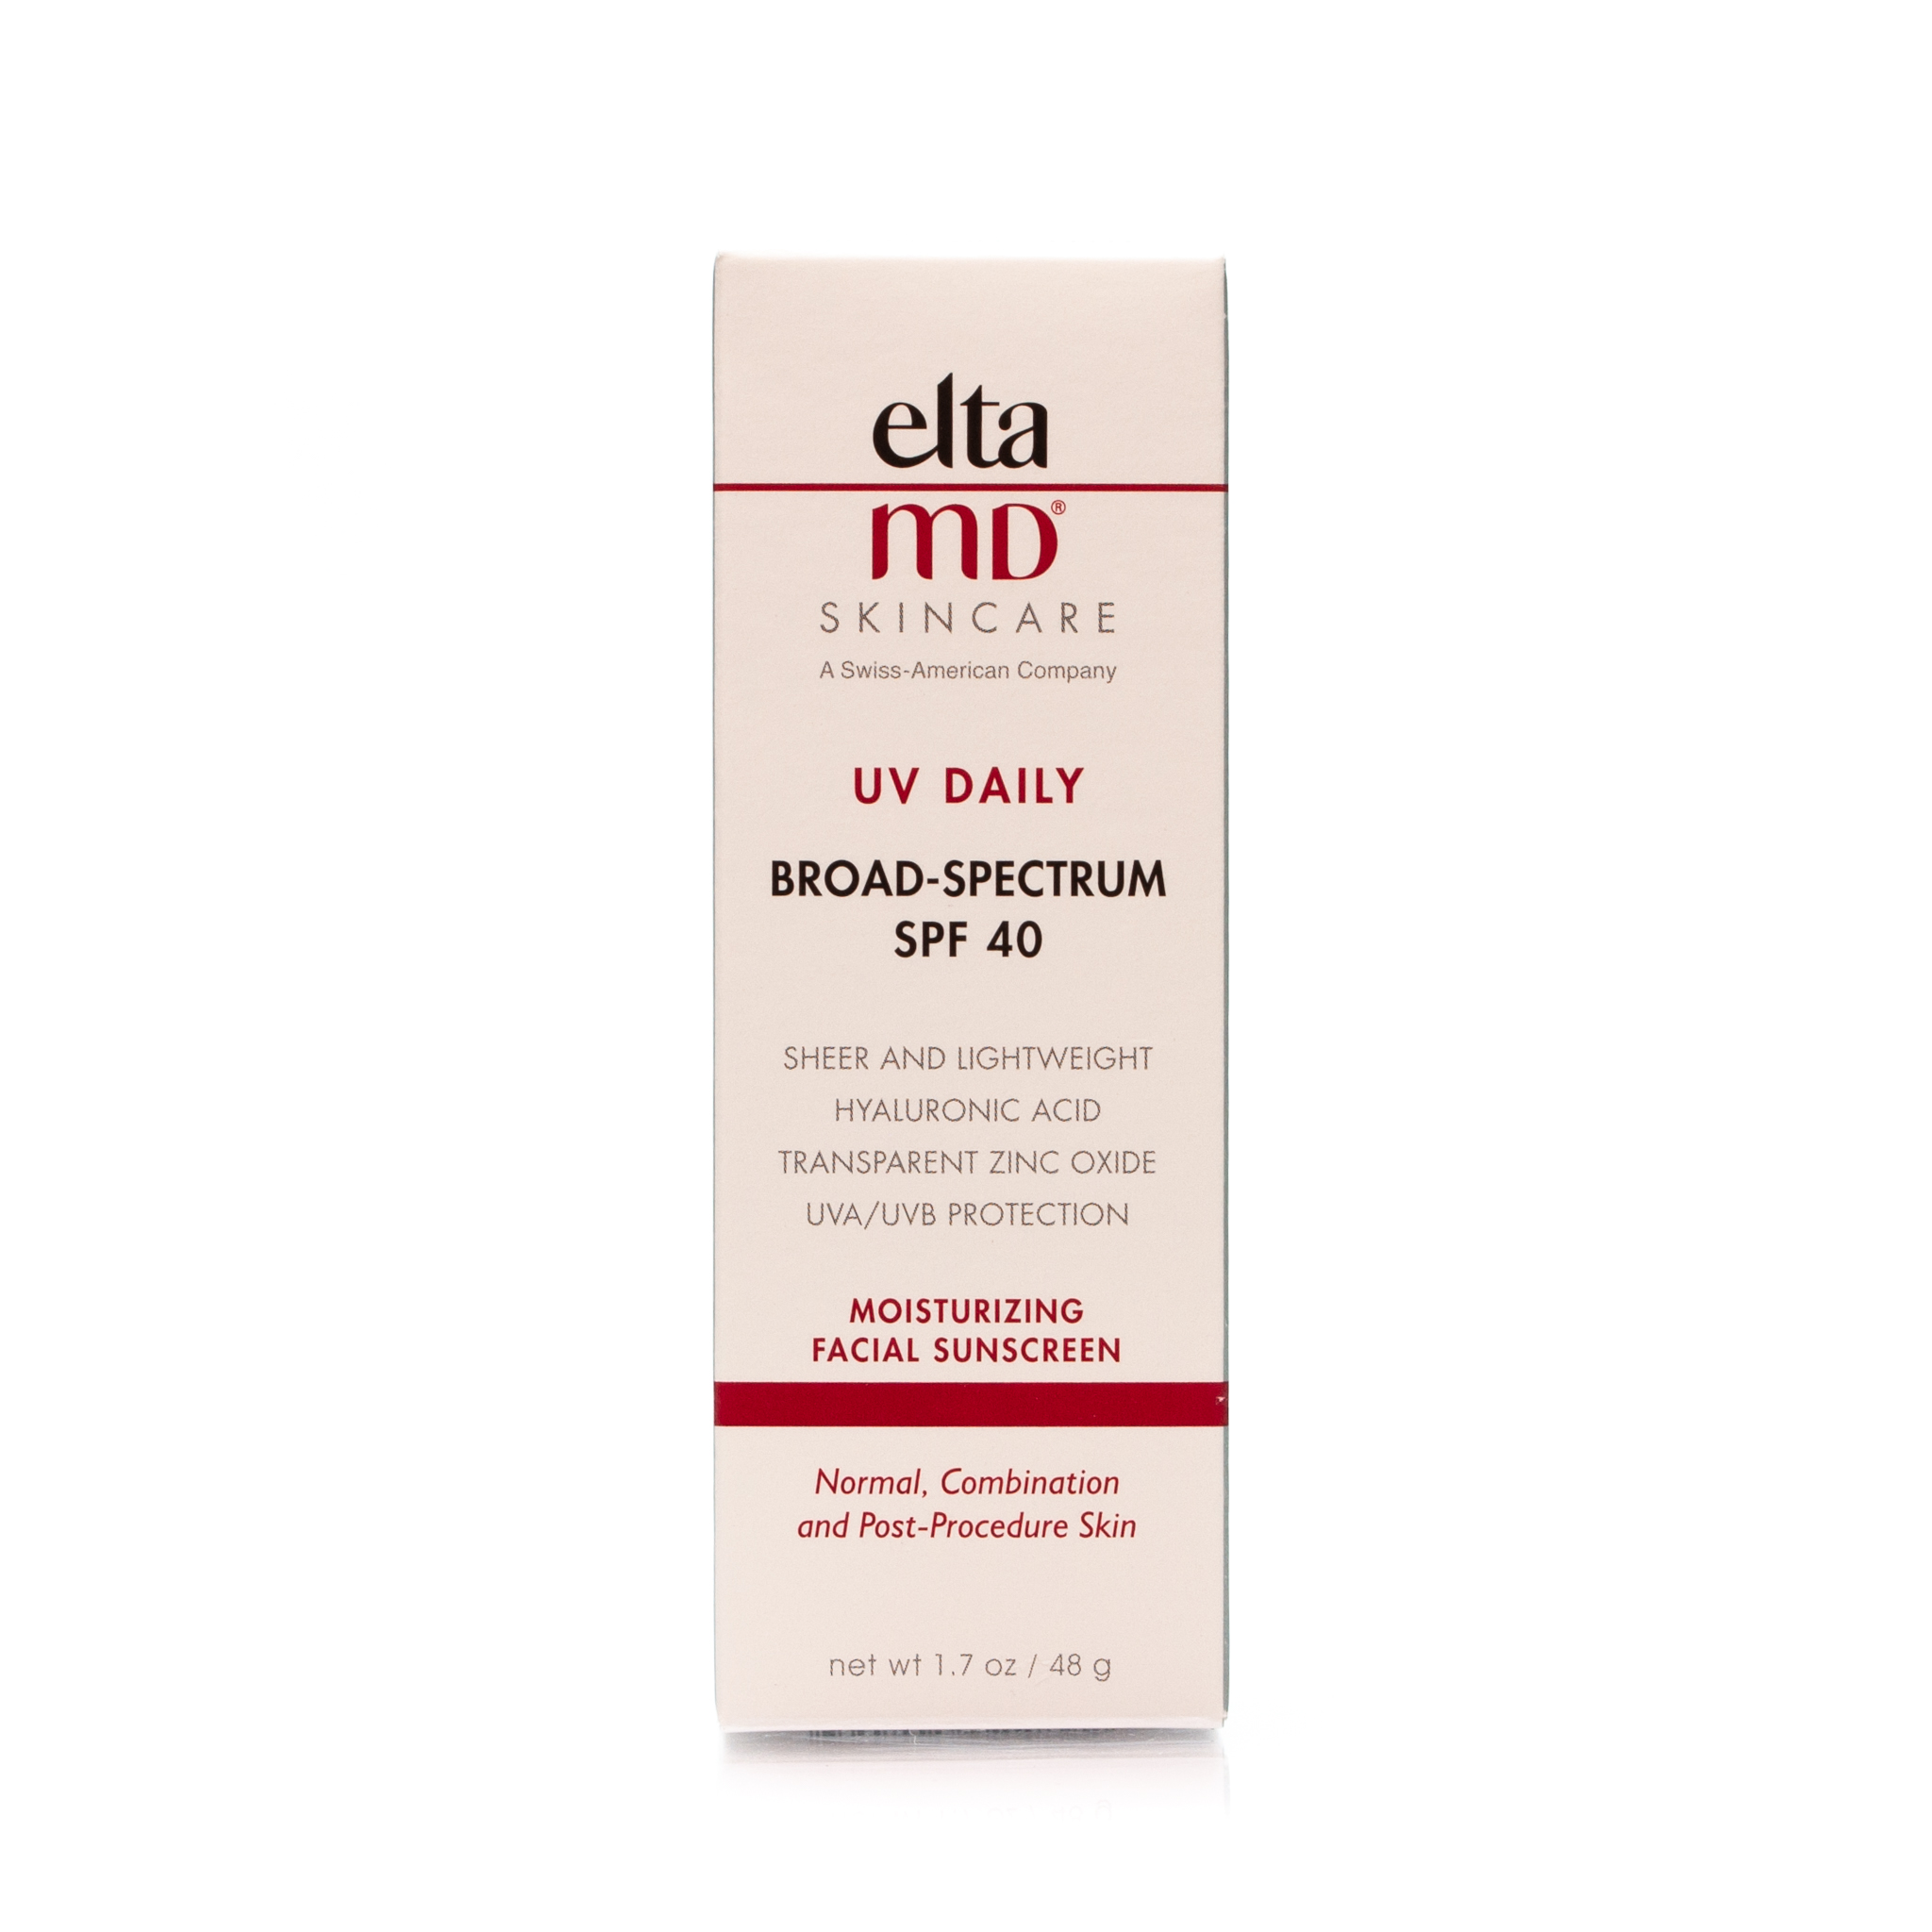 elta md tinted sunscreen uv clear